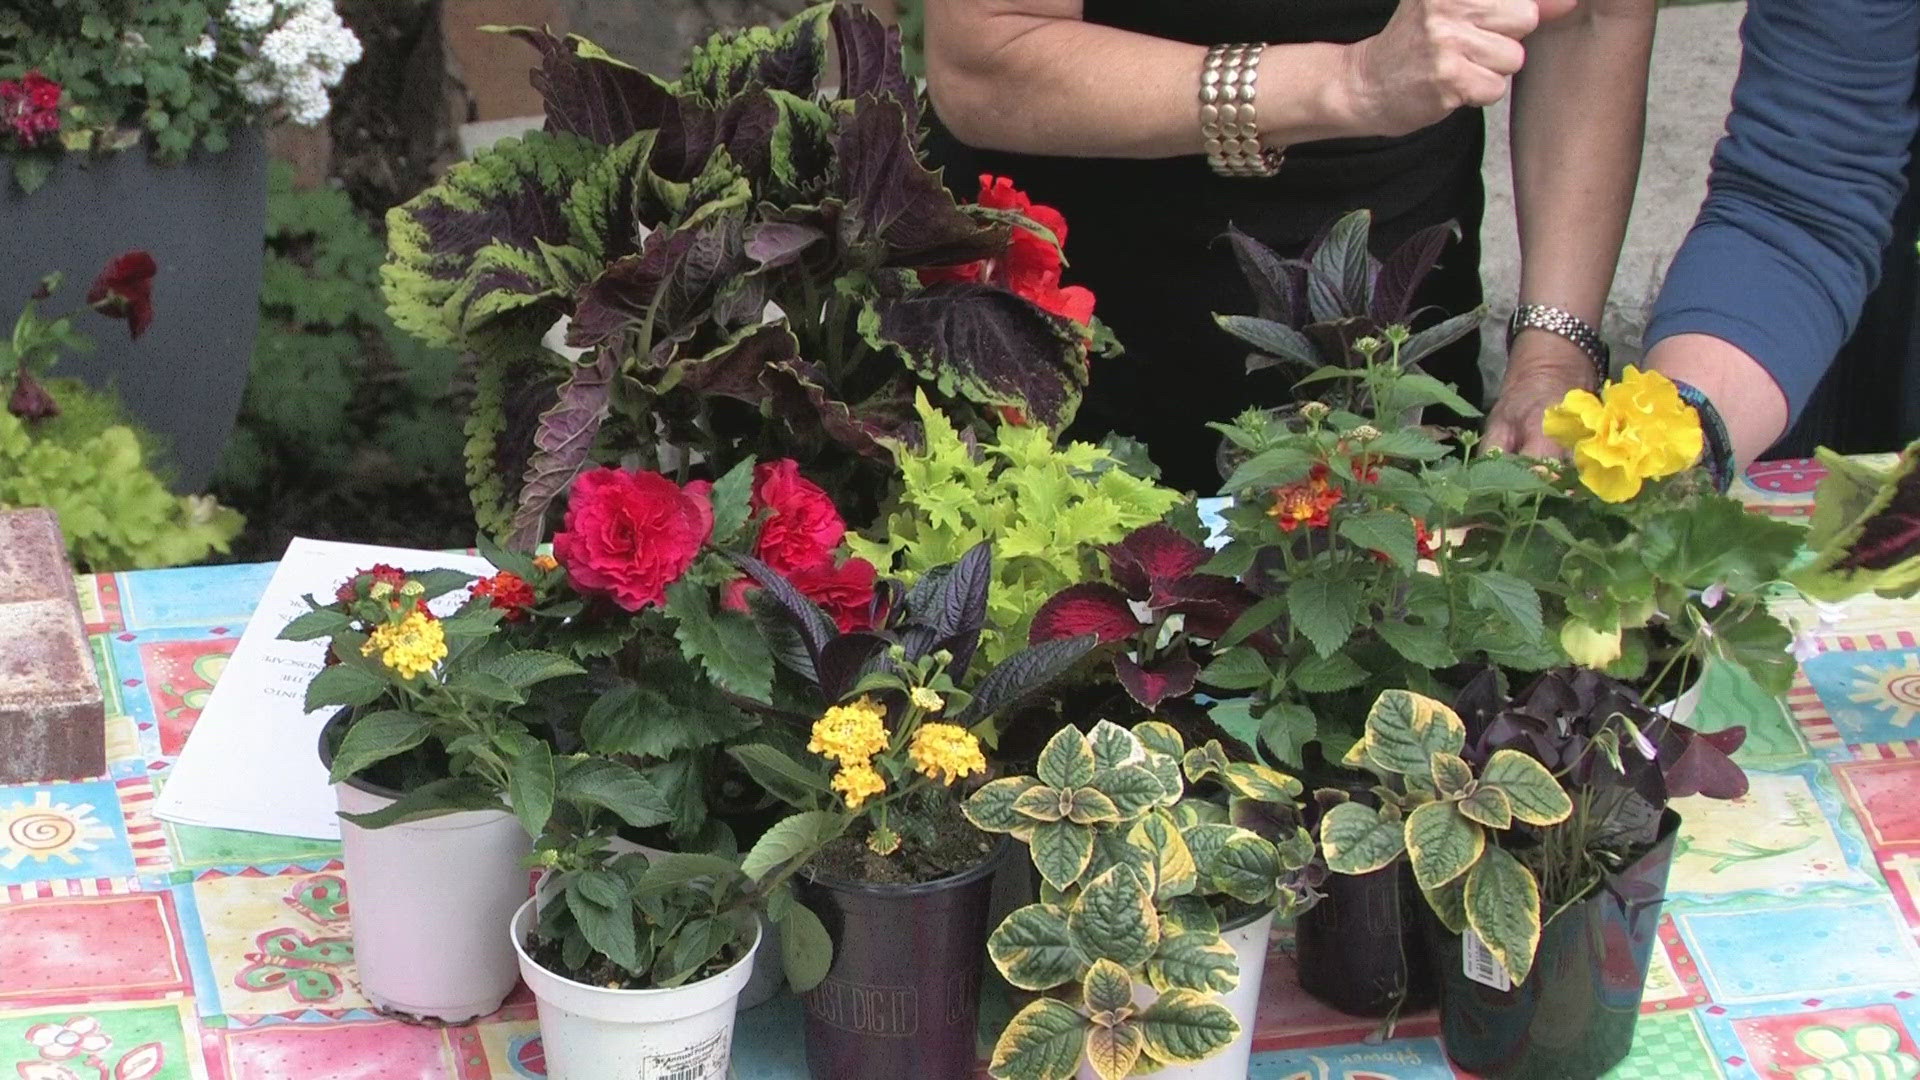 As spring gets into full bloom, we've asked the Association of Landscape Contractors of Colorado for tips on how to use flower pots to our advantage.